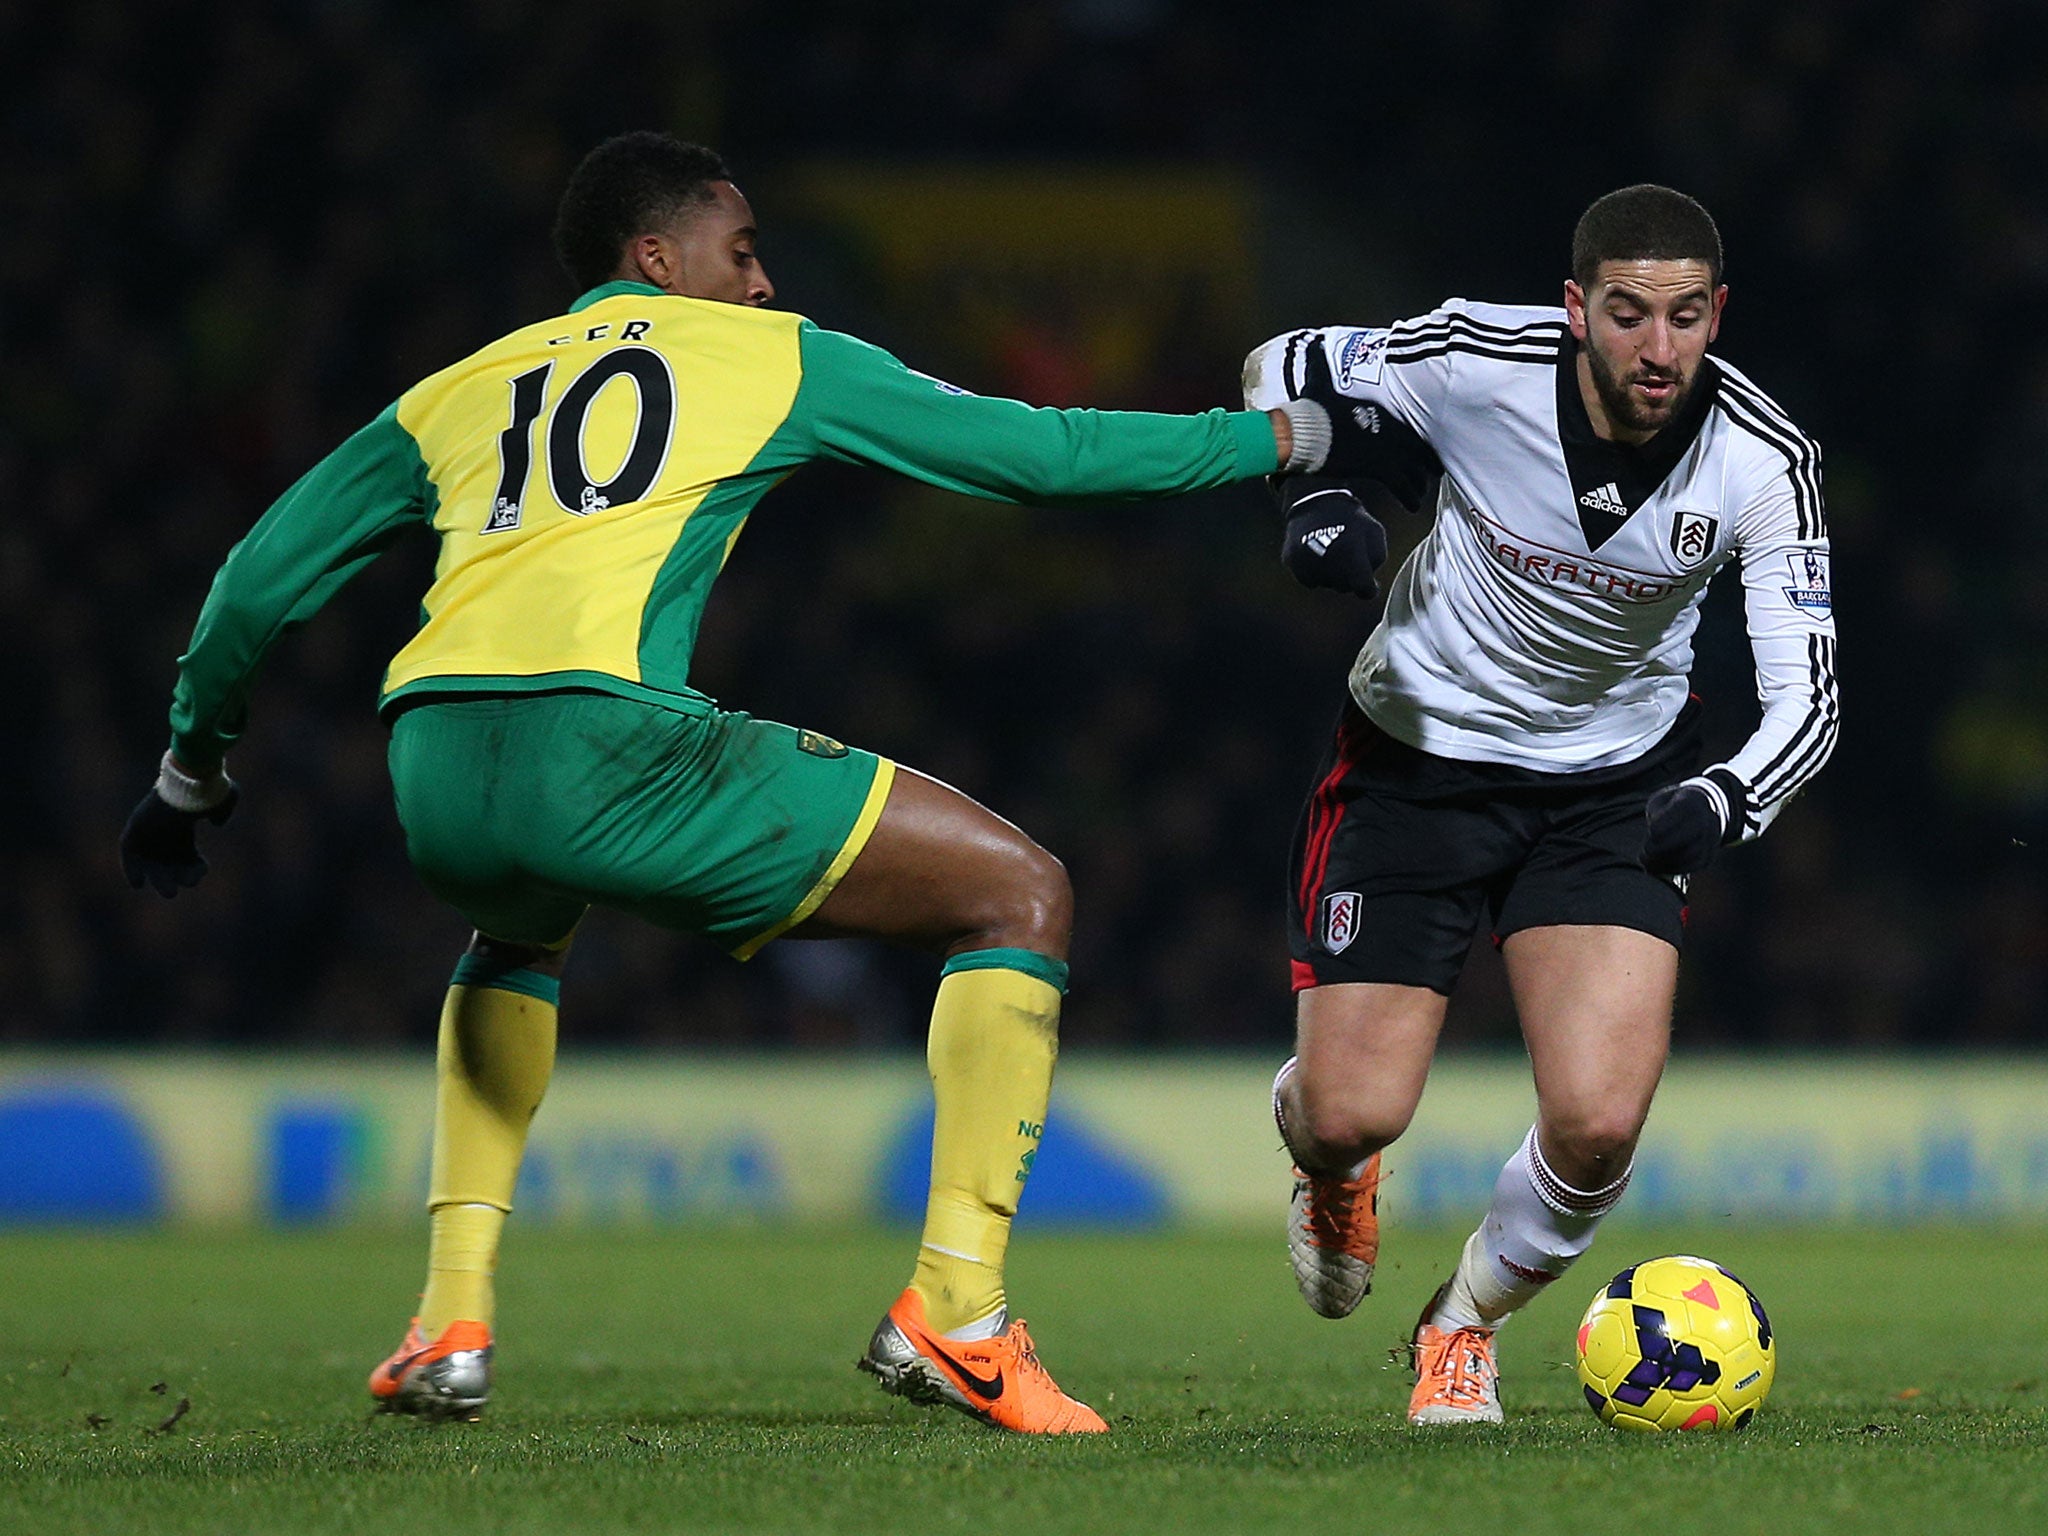 Norwich and Fulham will meet in the FA Cup, just eight days after playing in the Premier League